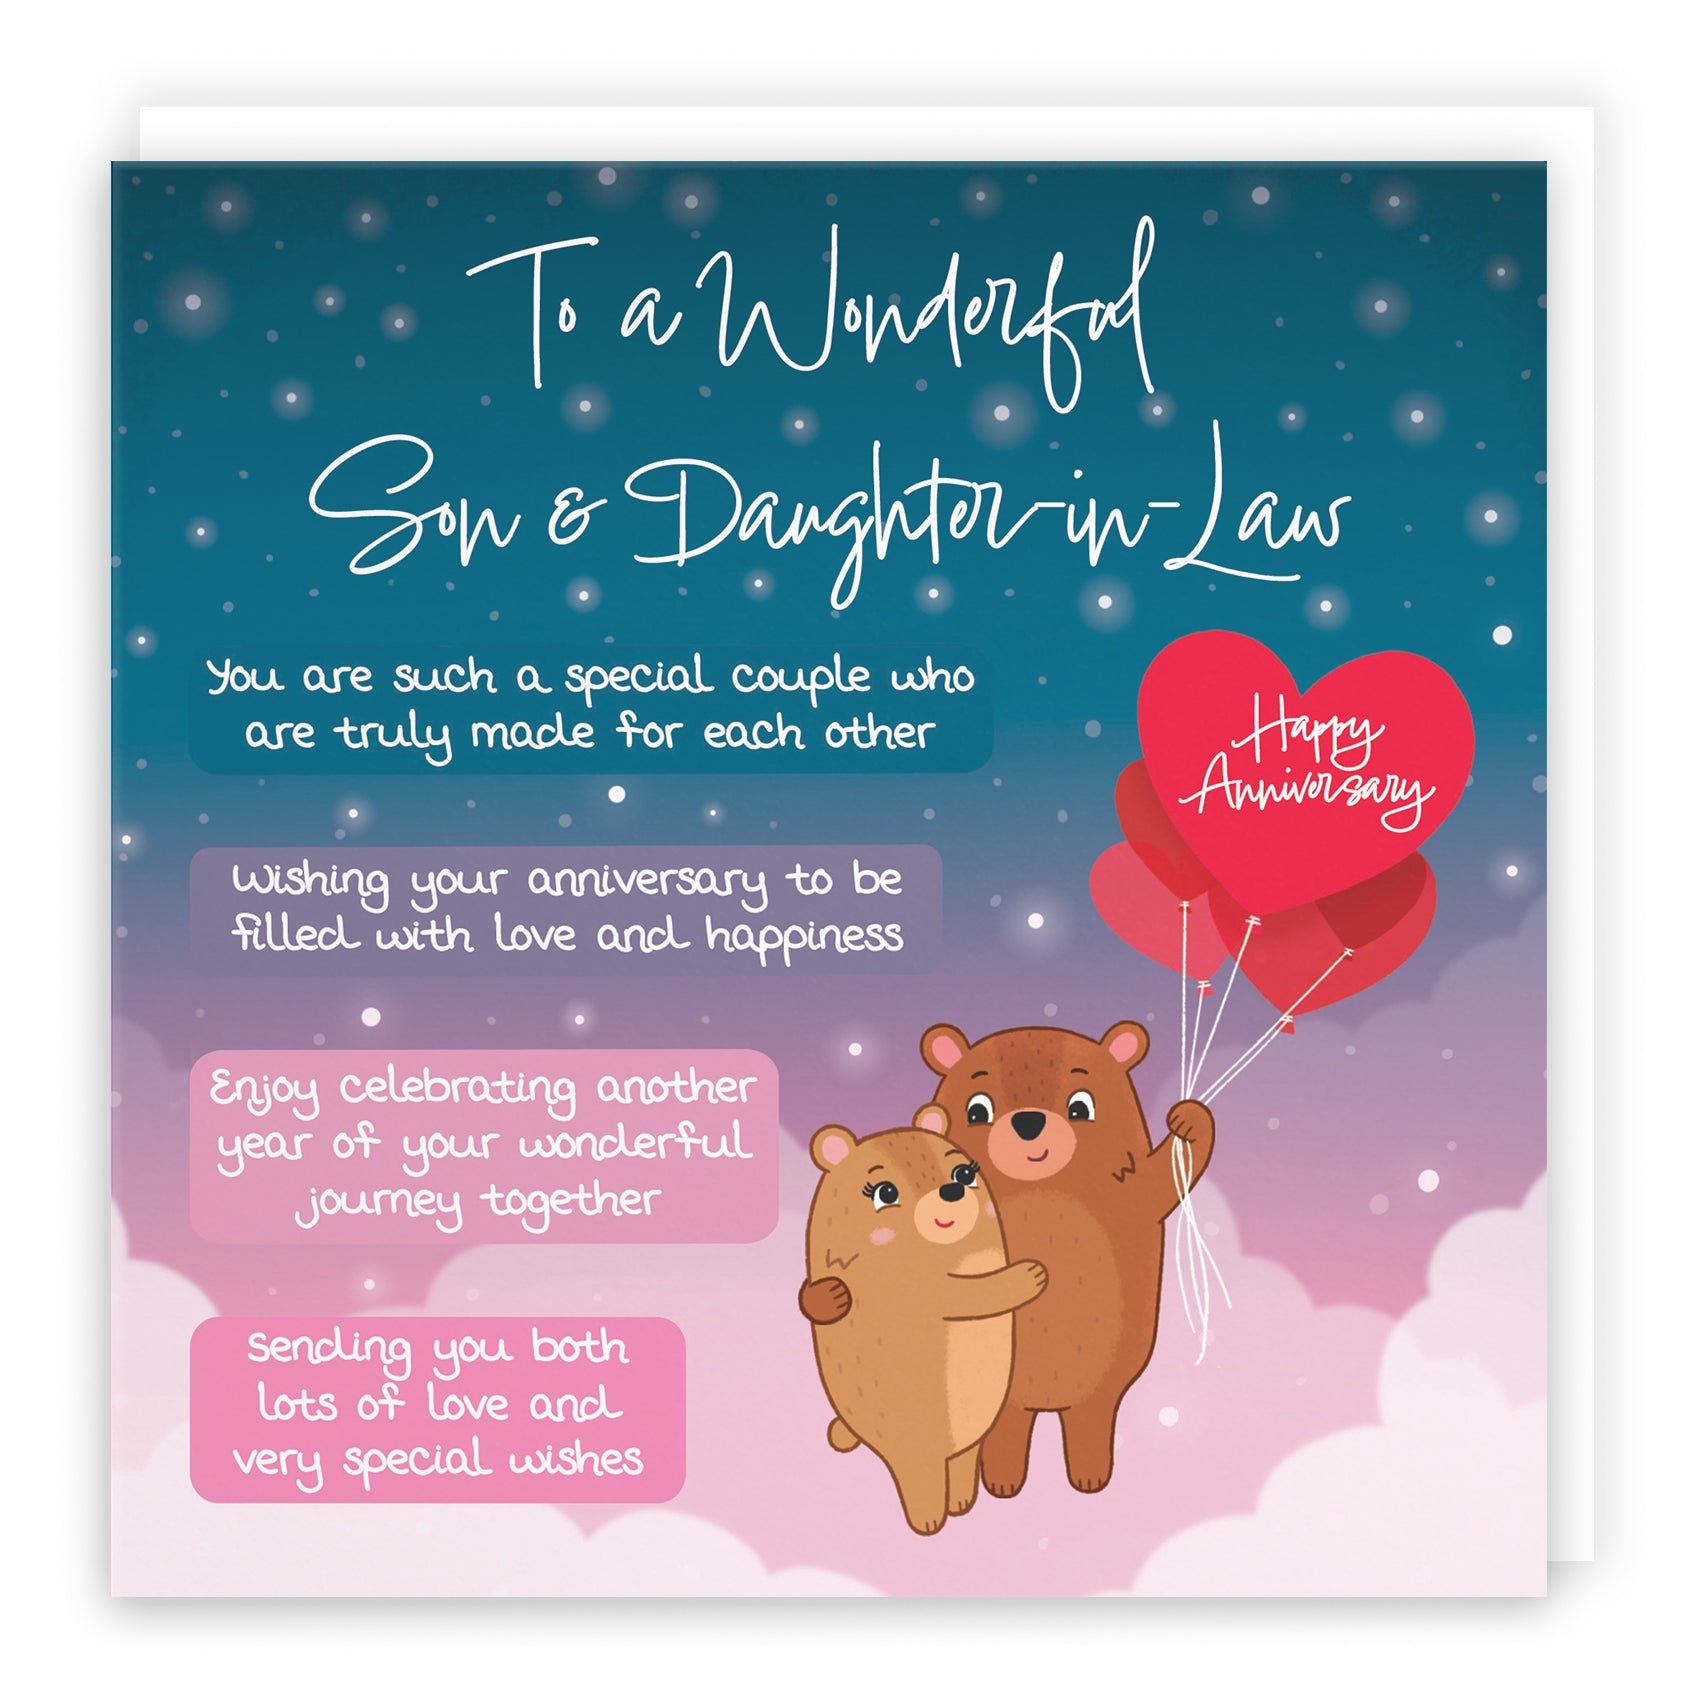 Son & Daughter-in-Law Anniversary Cards